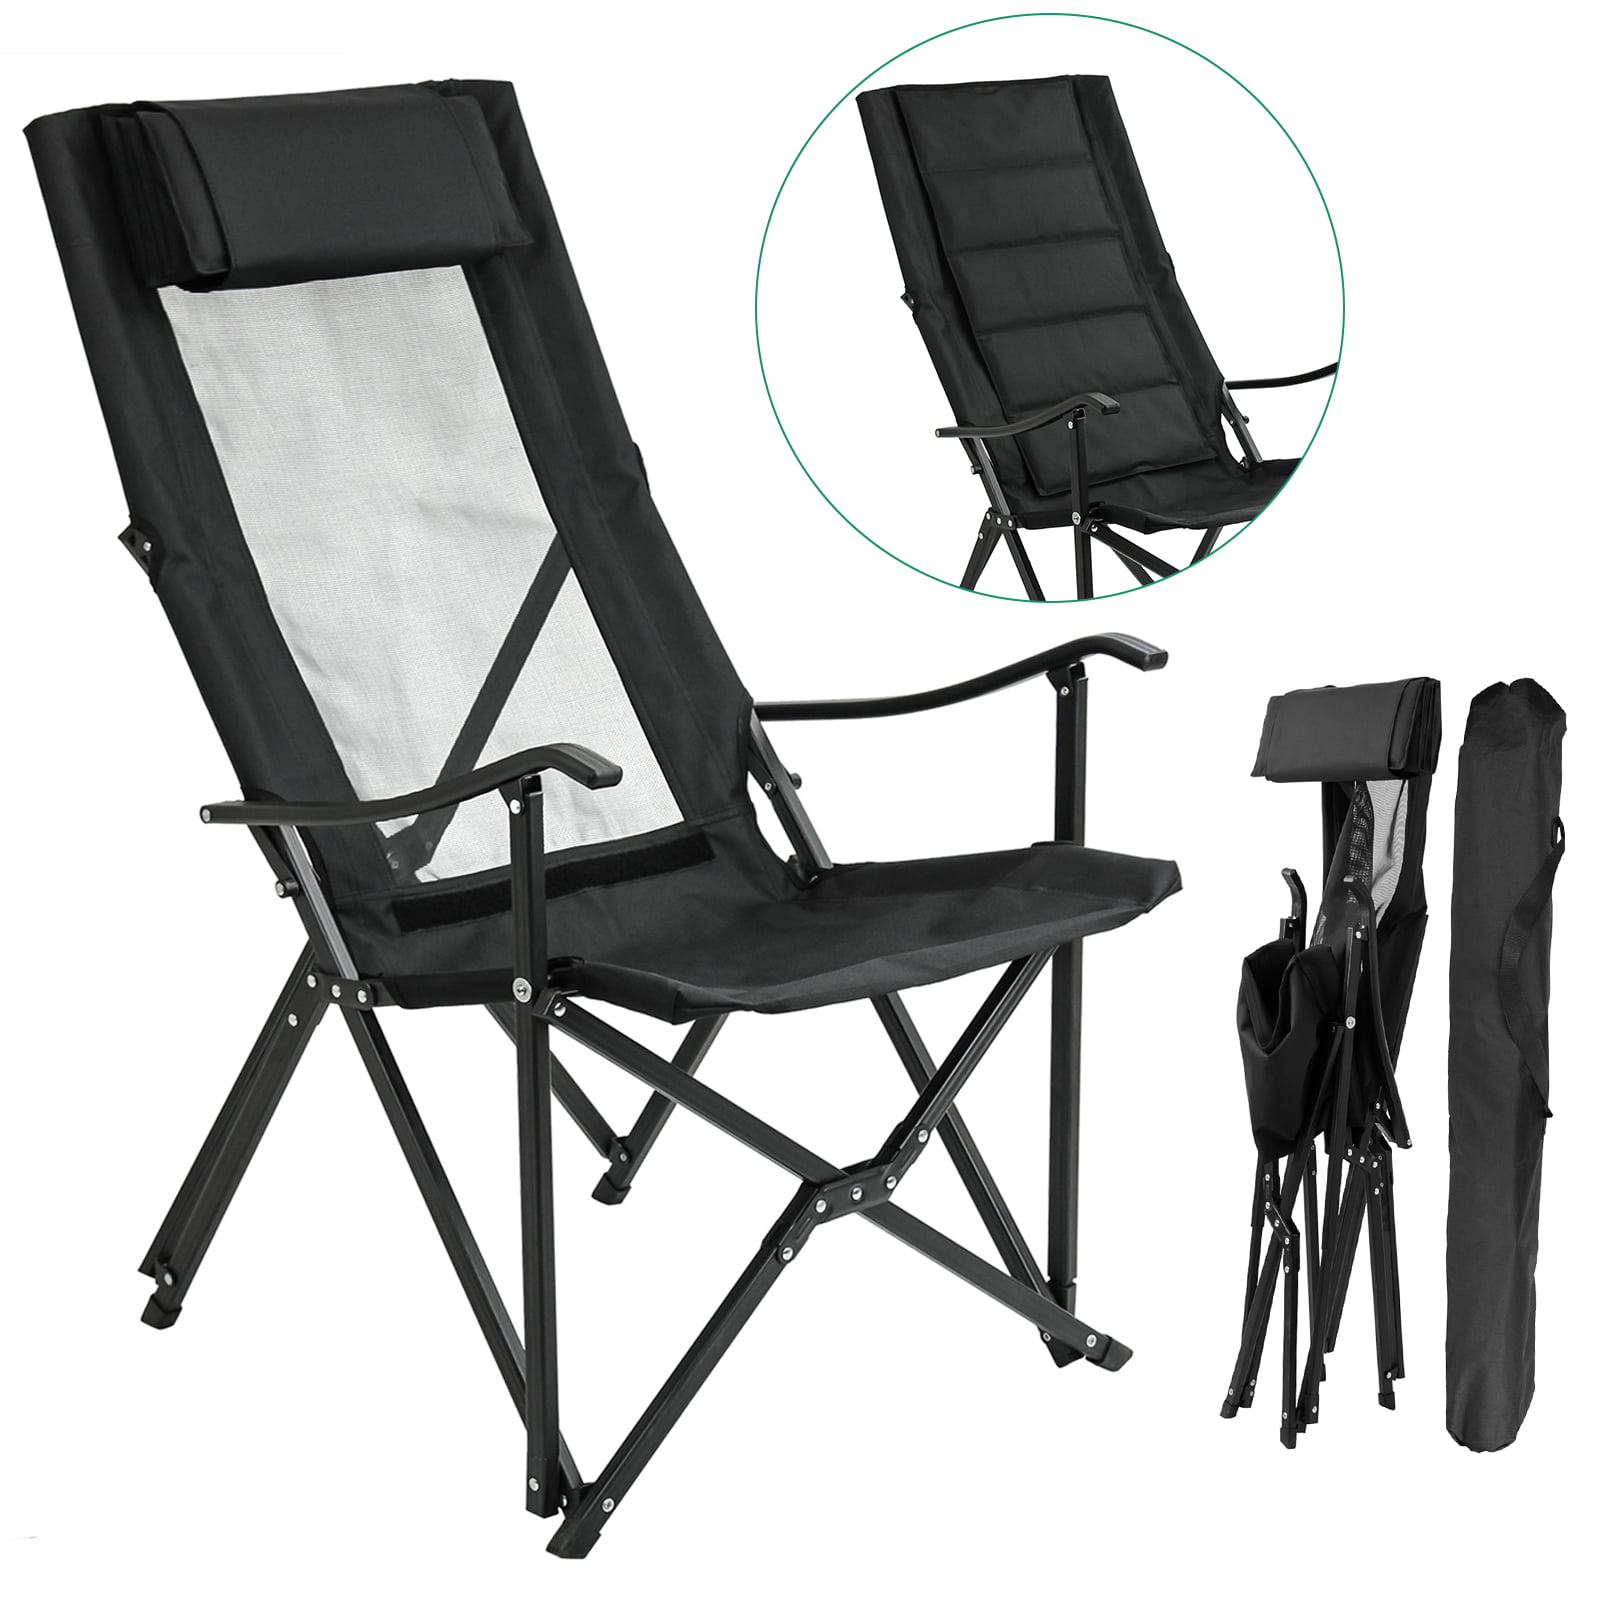 Outsunny Aluminium Textilene Garden Portable Stool Folding Travel Chair Footrest Outdoor Patio Camping Hiking Fishing Seat